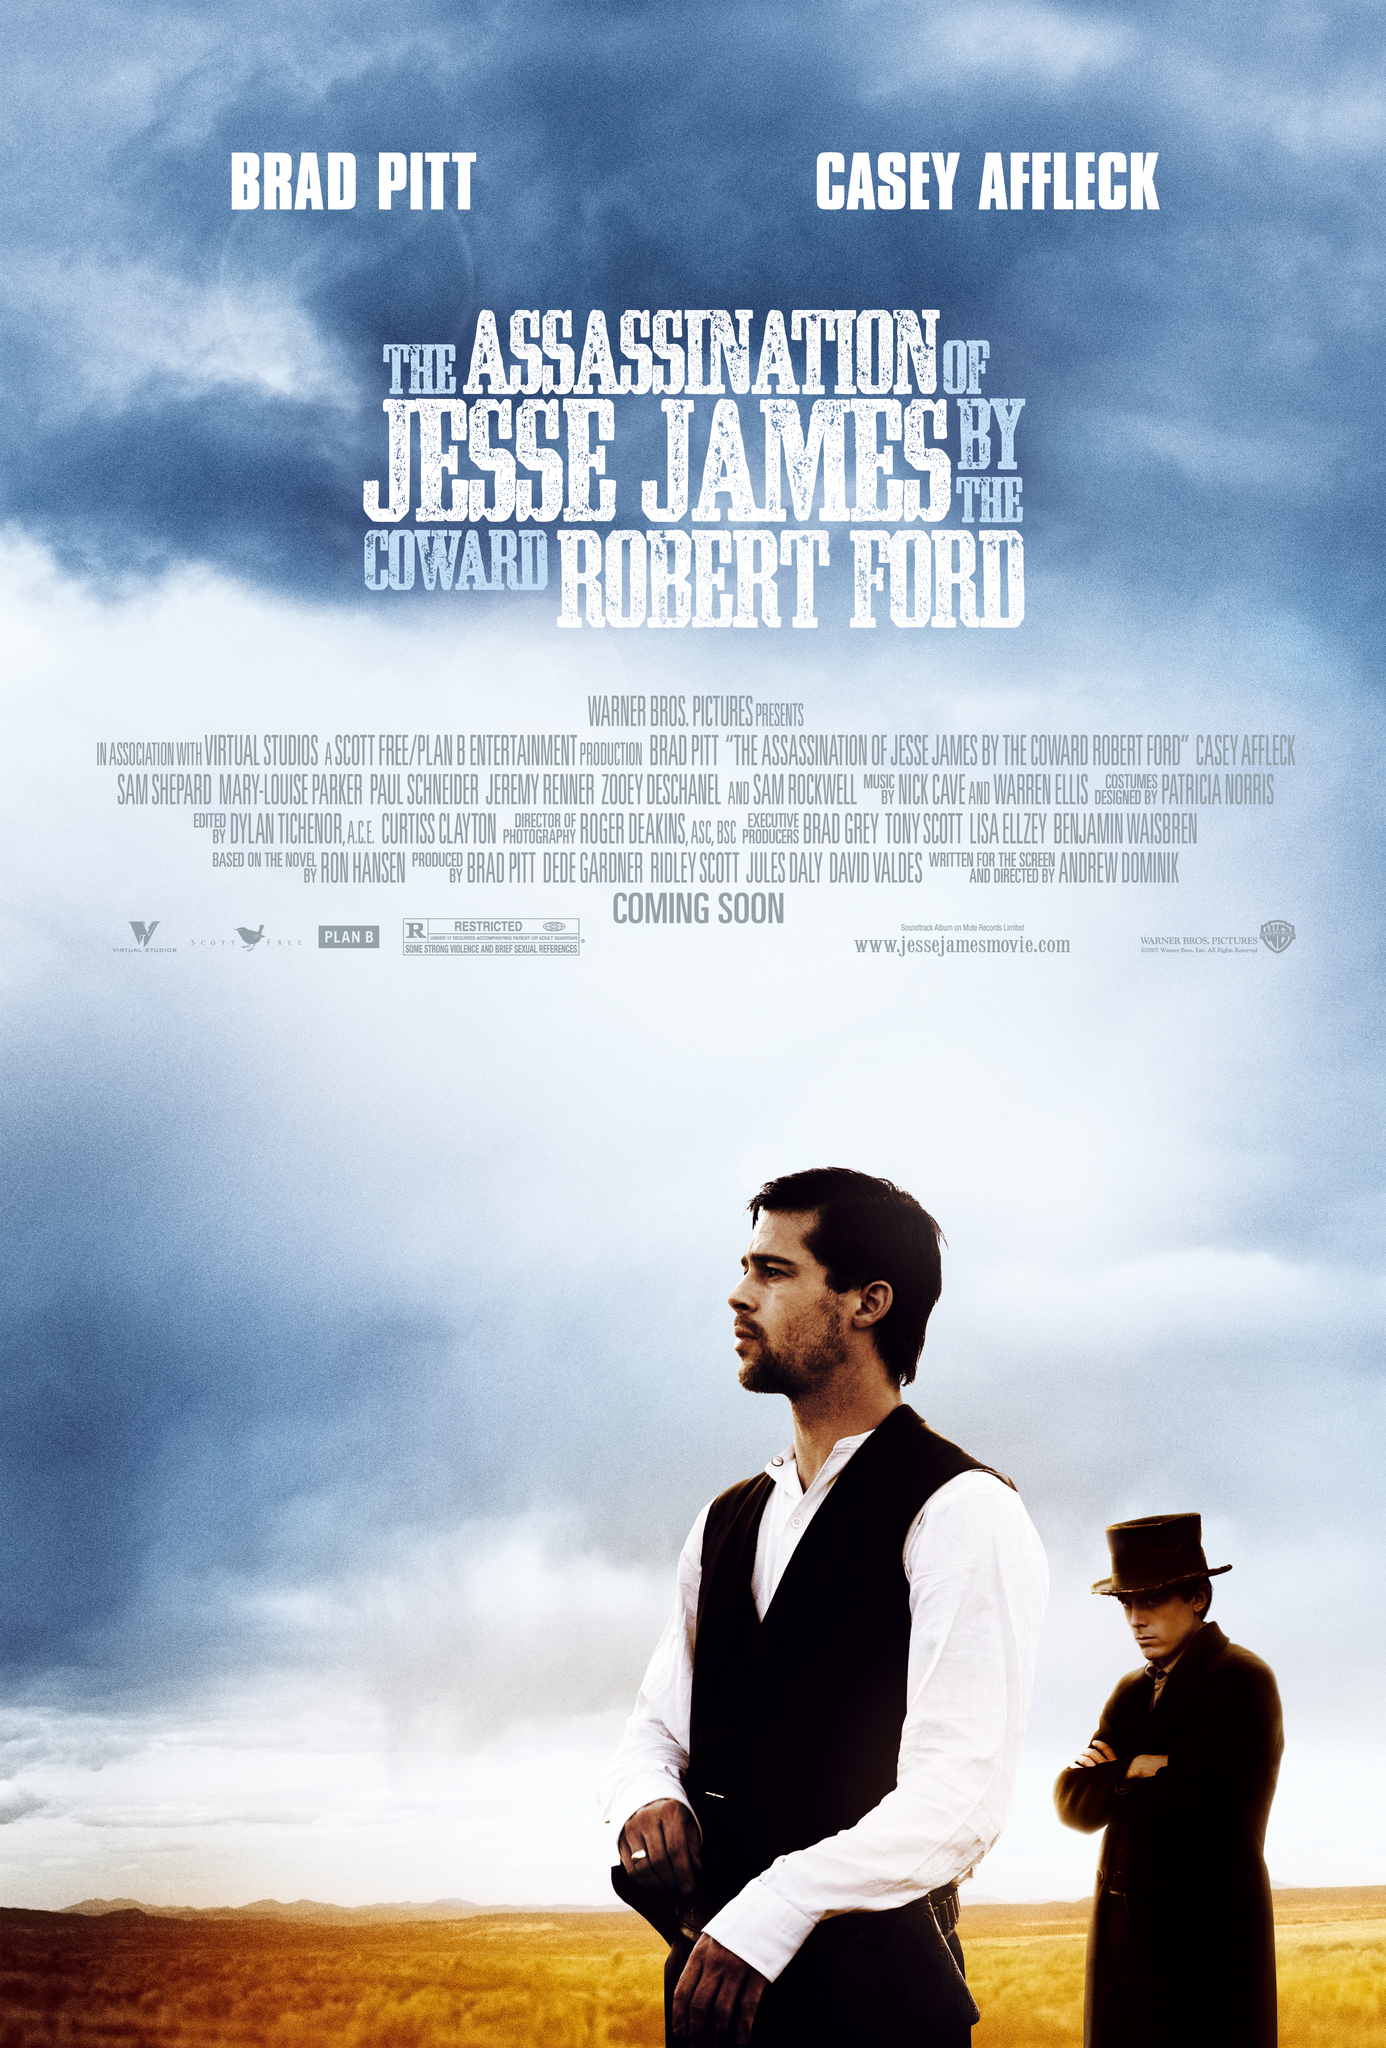 The Assassination of Jesse James by the Coward Robert Ford (2007) starring Brad Pitt on DVD on DVD